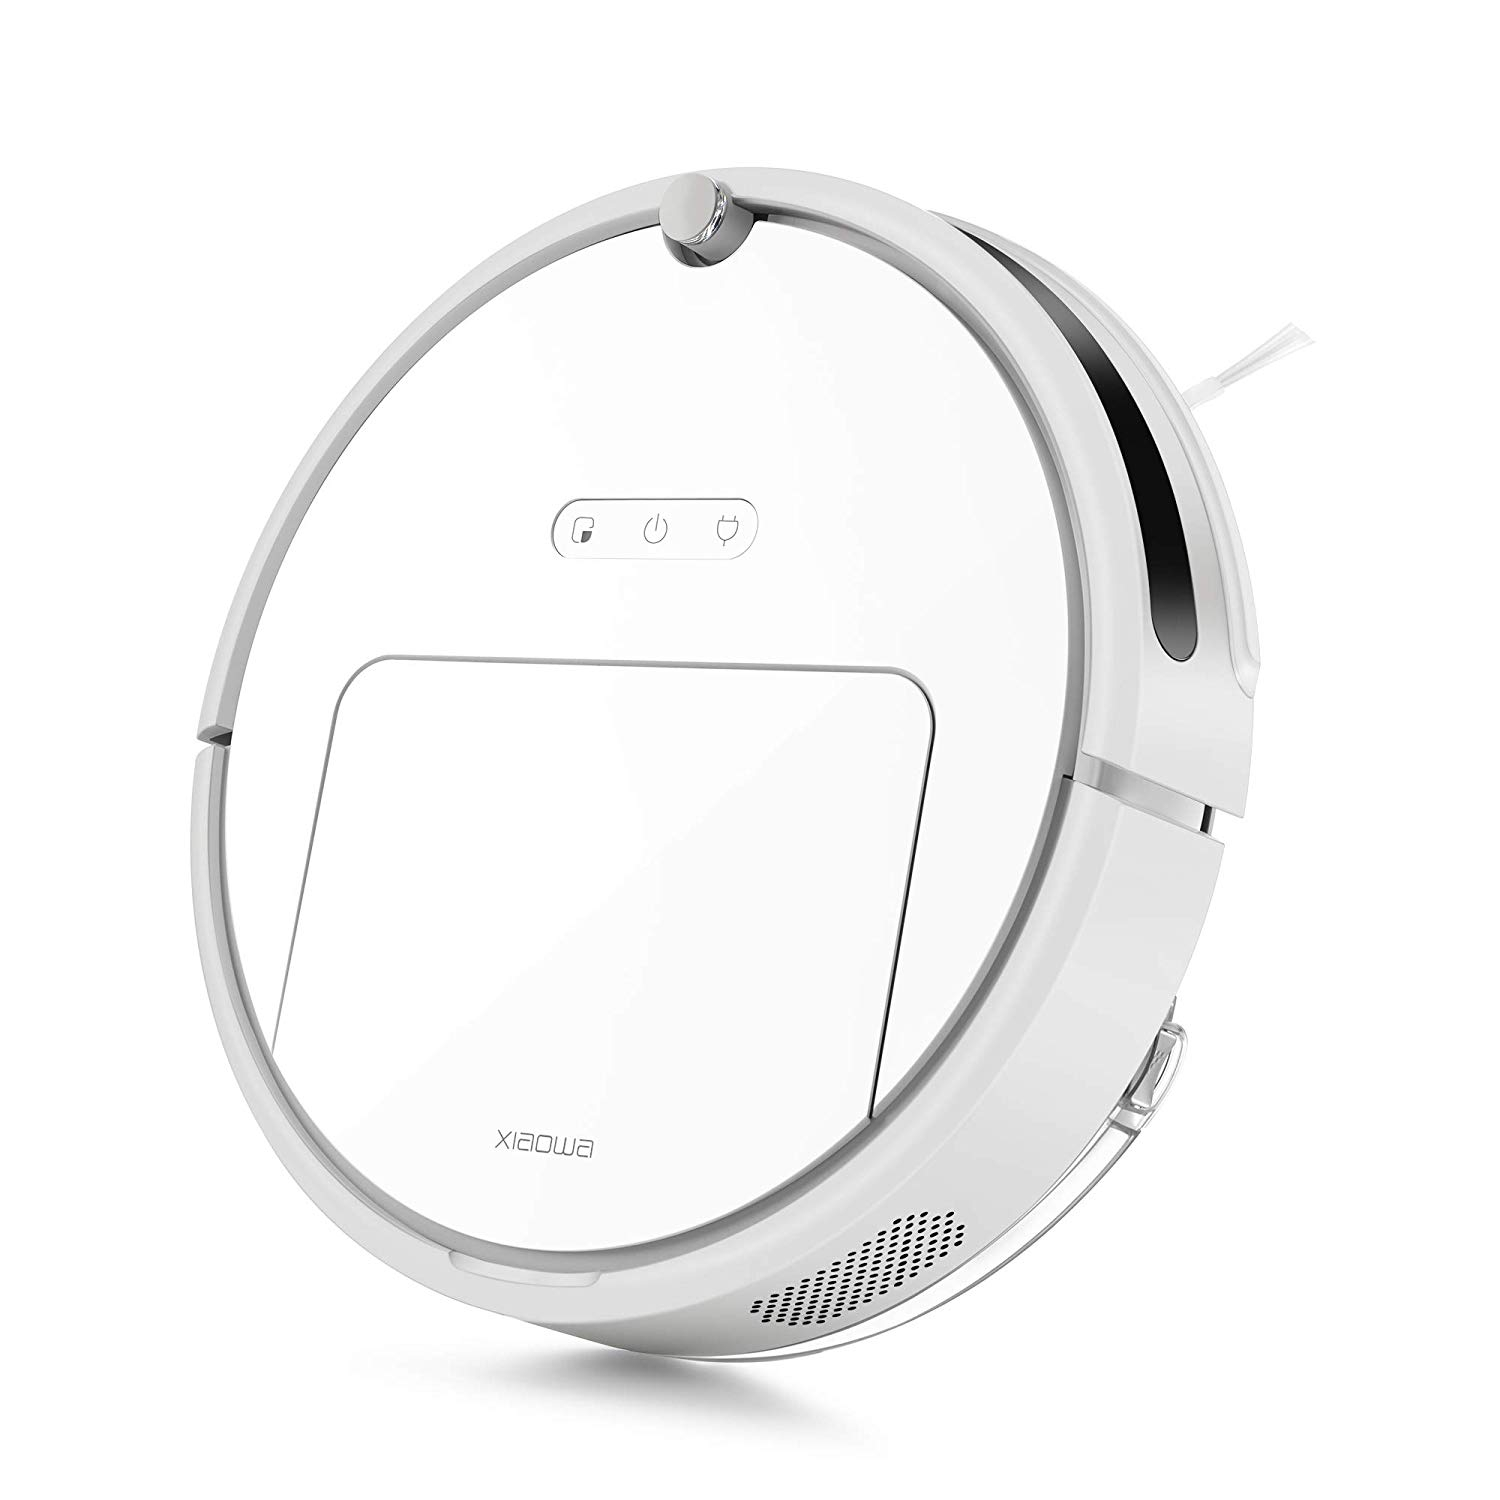 amazon rolls back prices on roomba eufy deebot and roborock robot vacuums e20 vacuum cleaner  mop 1